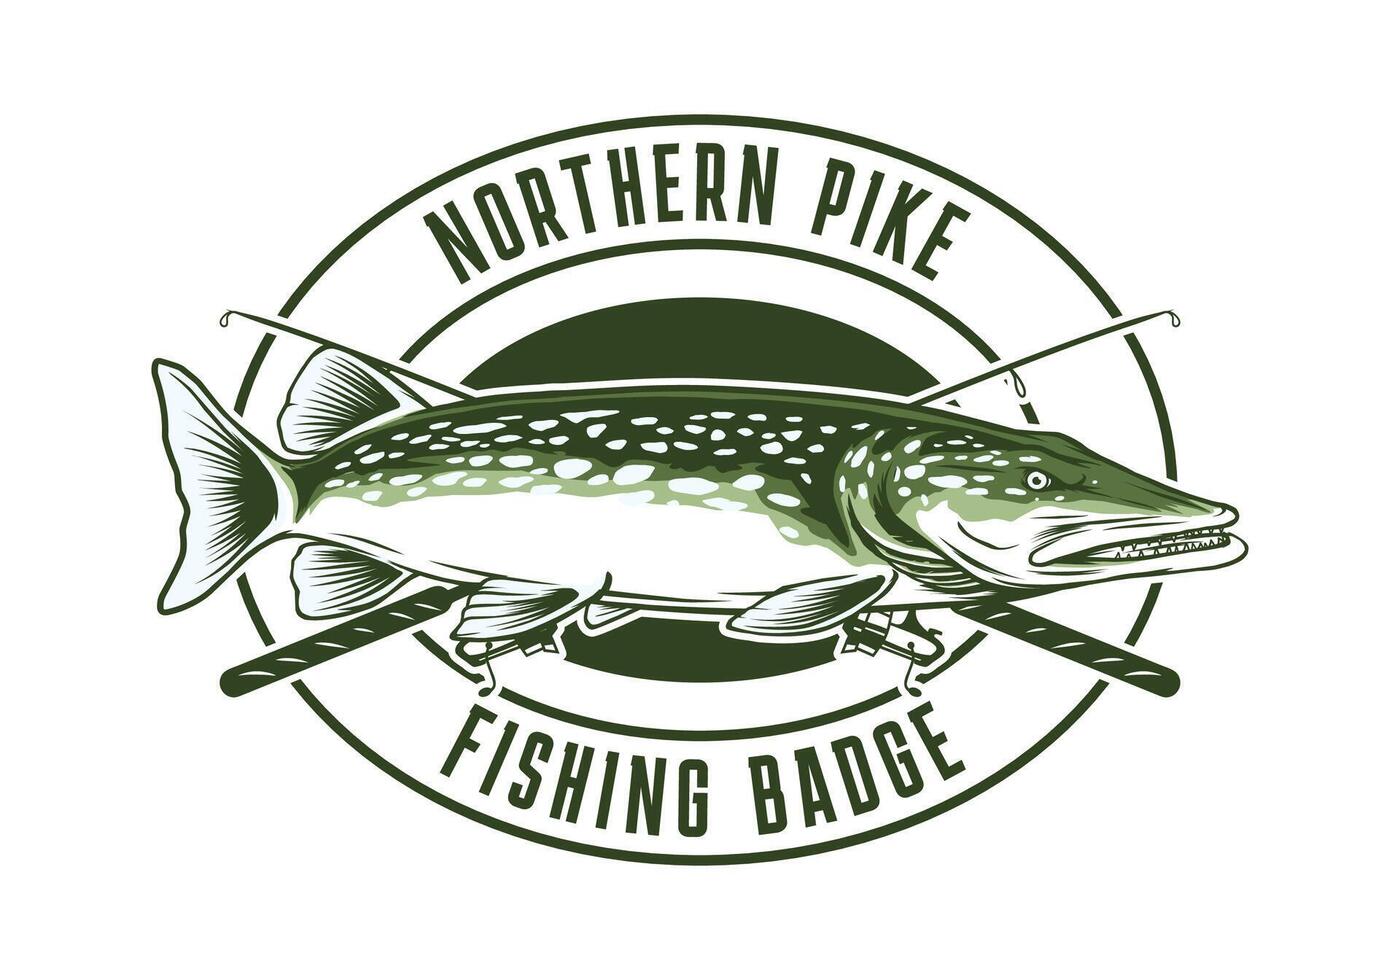 Northern pike fishing badge template vector